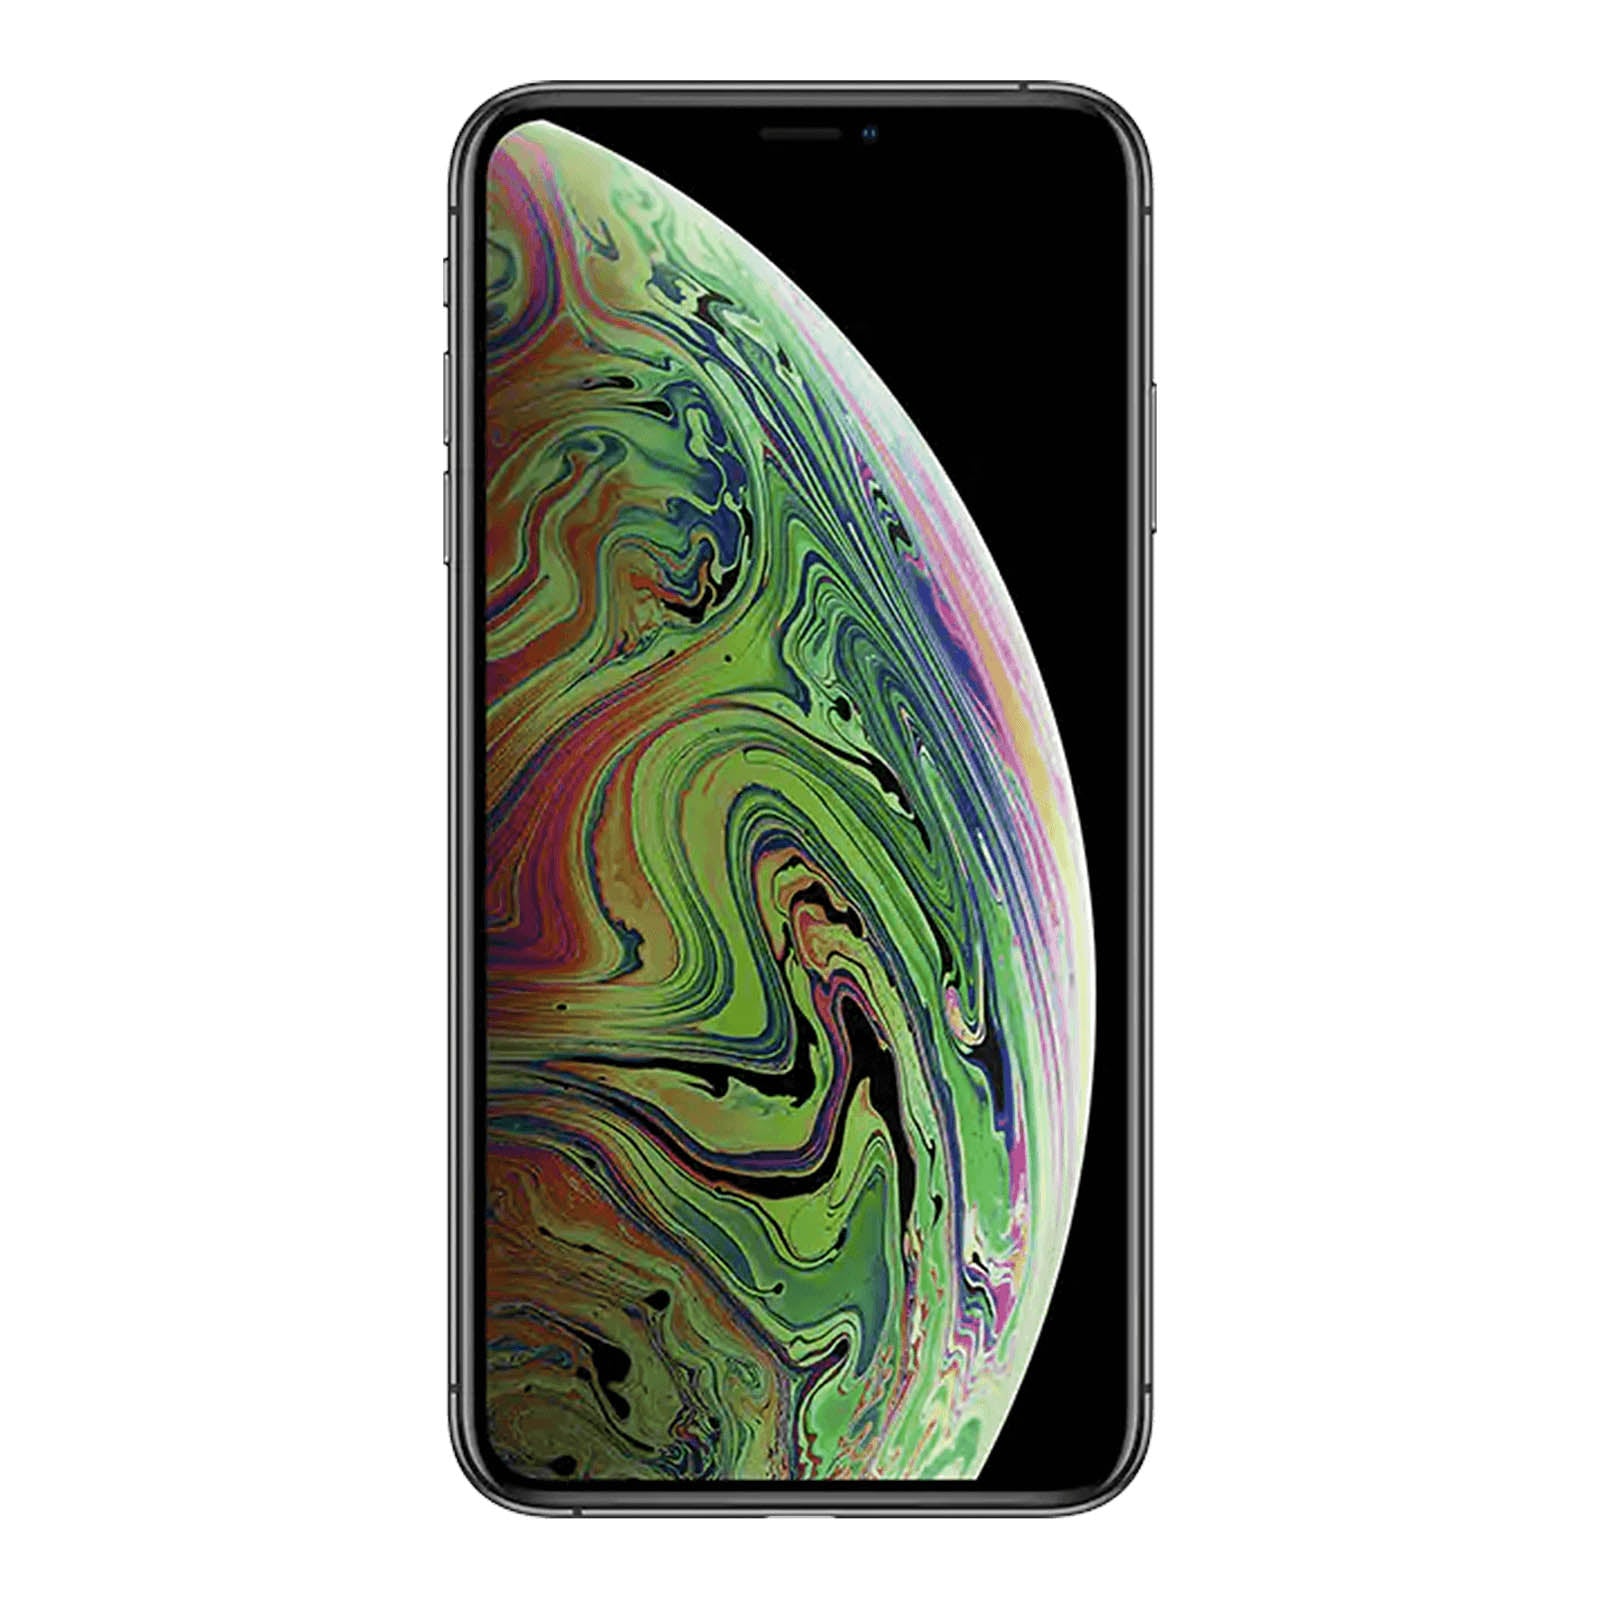 Apple iPhone XS Max 256GB Space Grey Very Good - AT&T